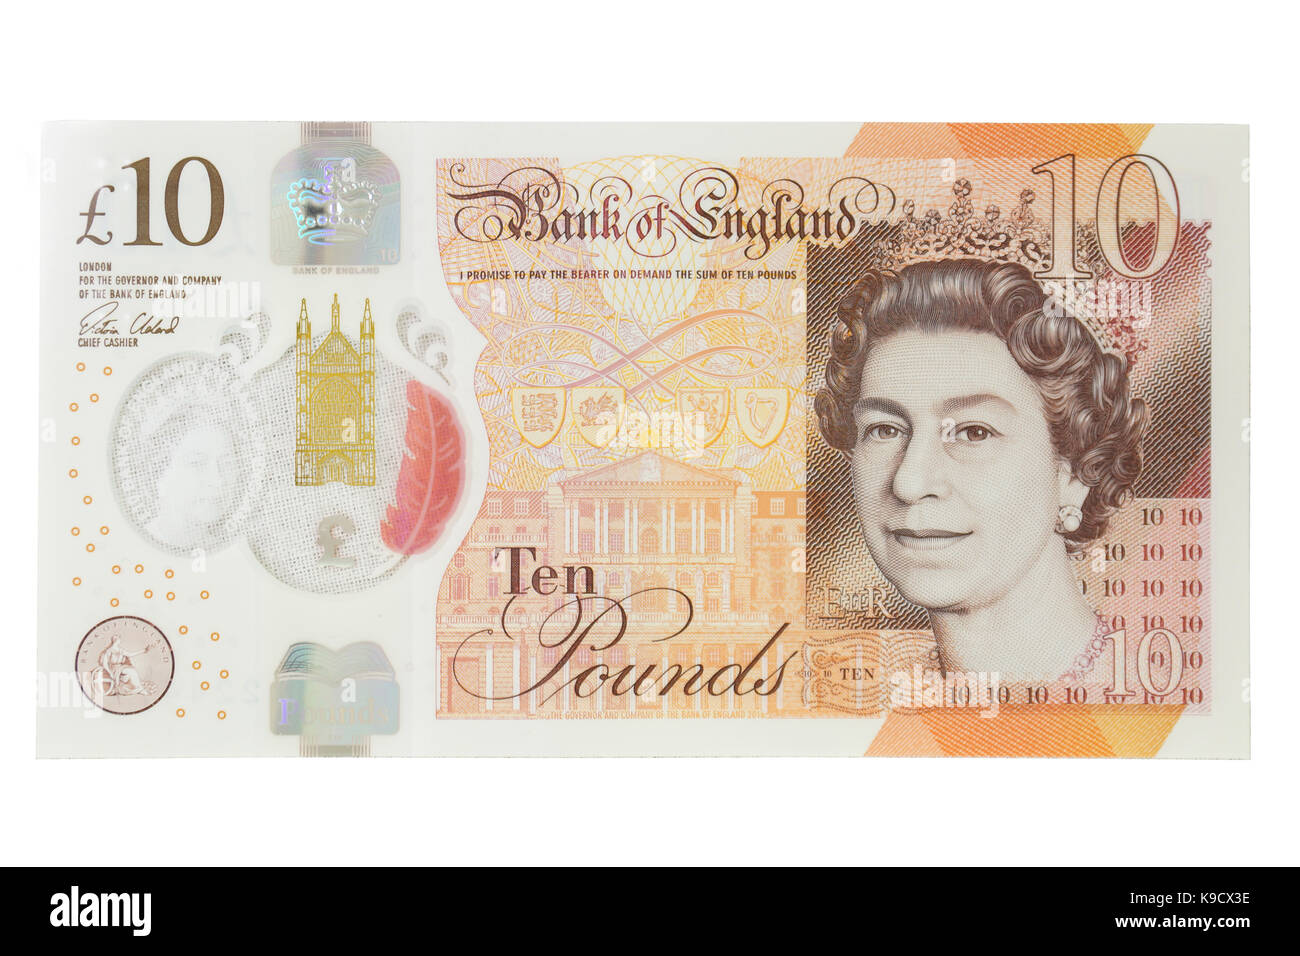 The newly introduced currency of the United Kingdom - The polymer ten pound (£10) note with features more measures against counterfitters. Stock Photo